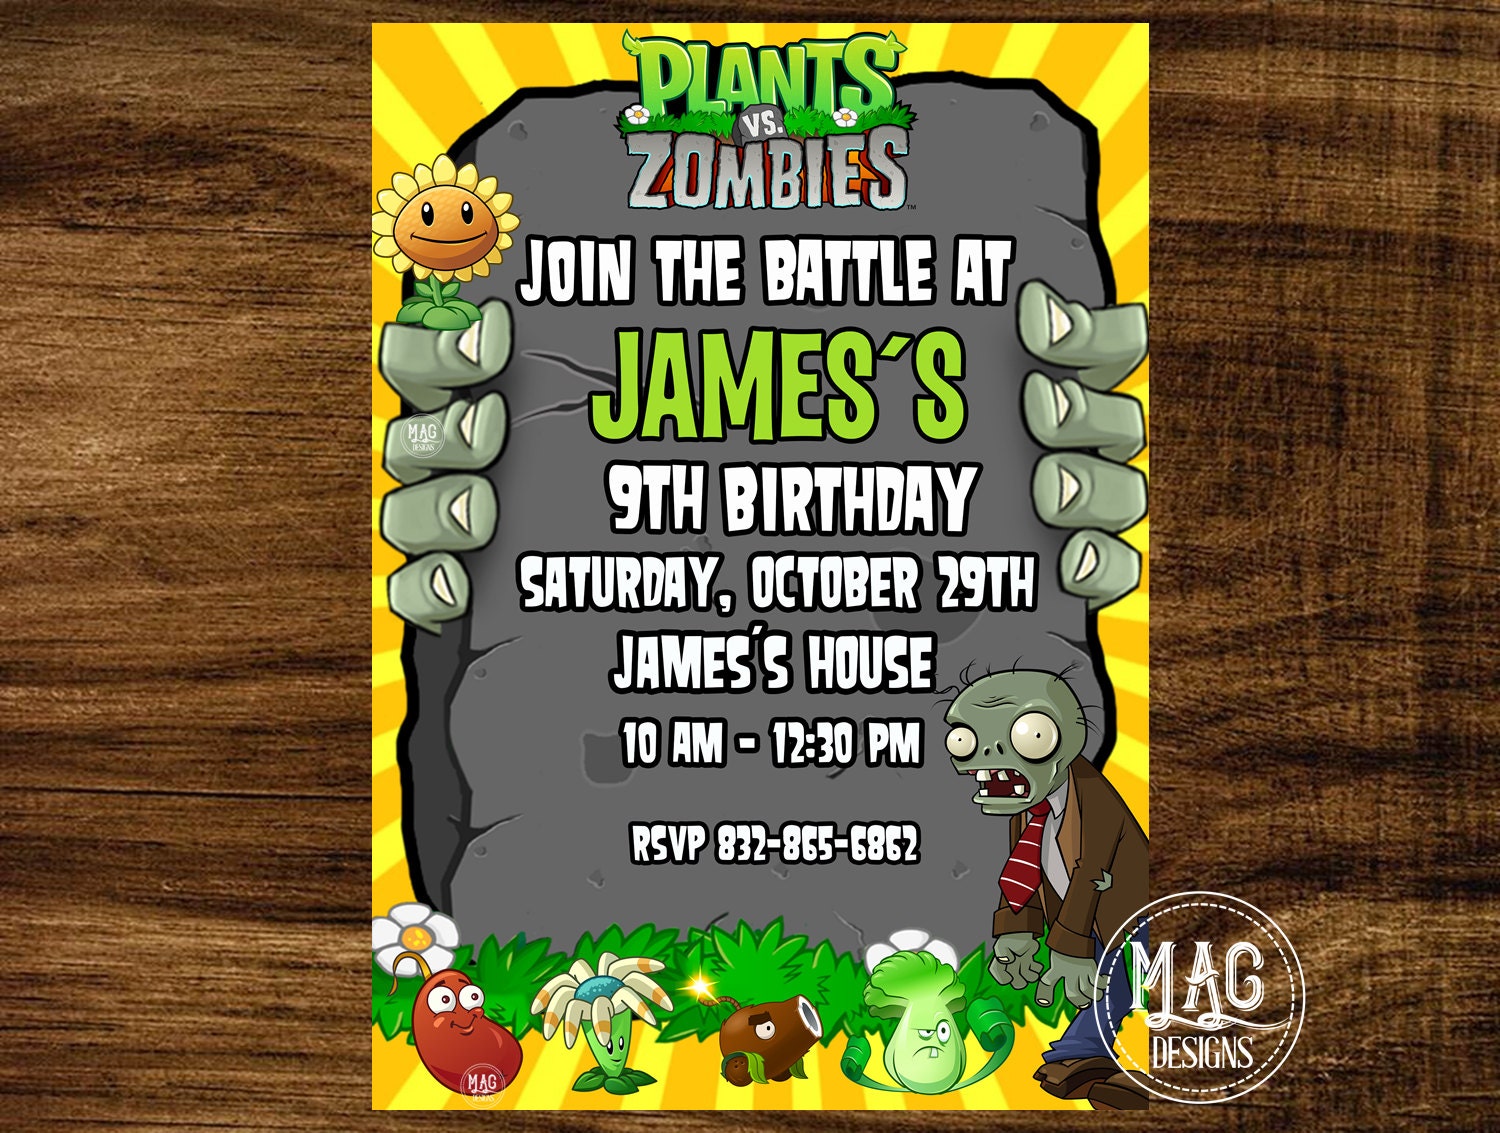 Plants vs Zombies: Free Printable Cards or Invitations. - Oh My